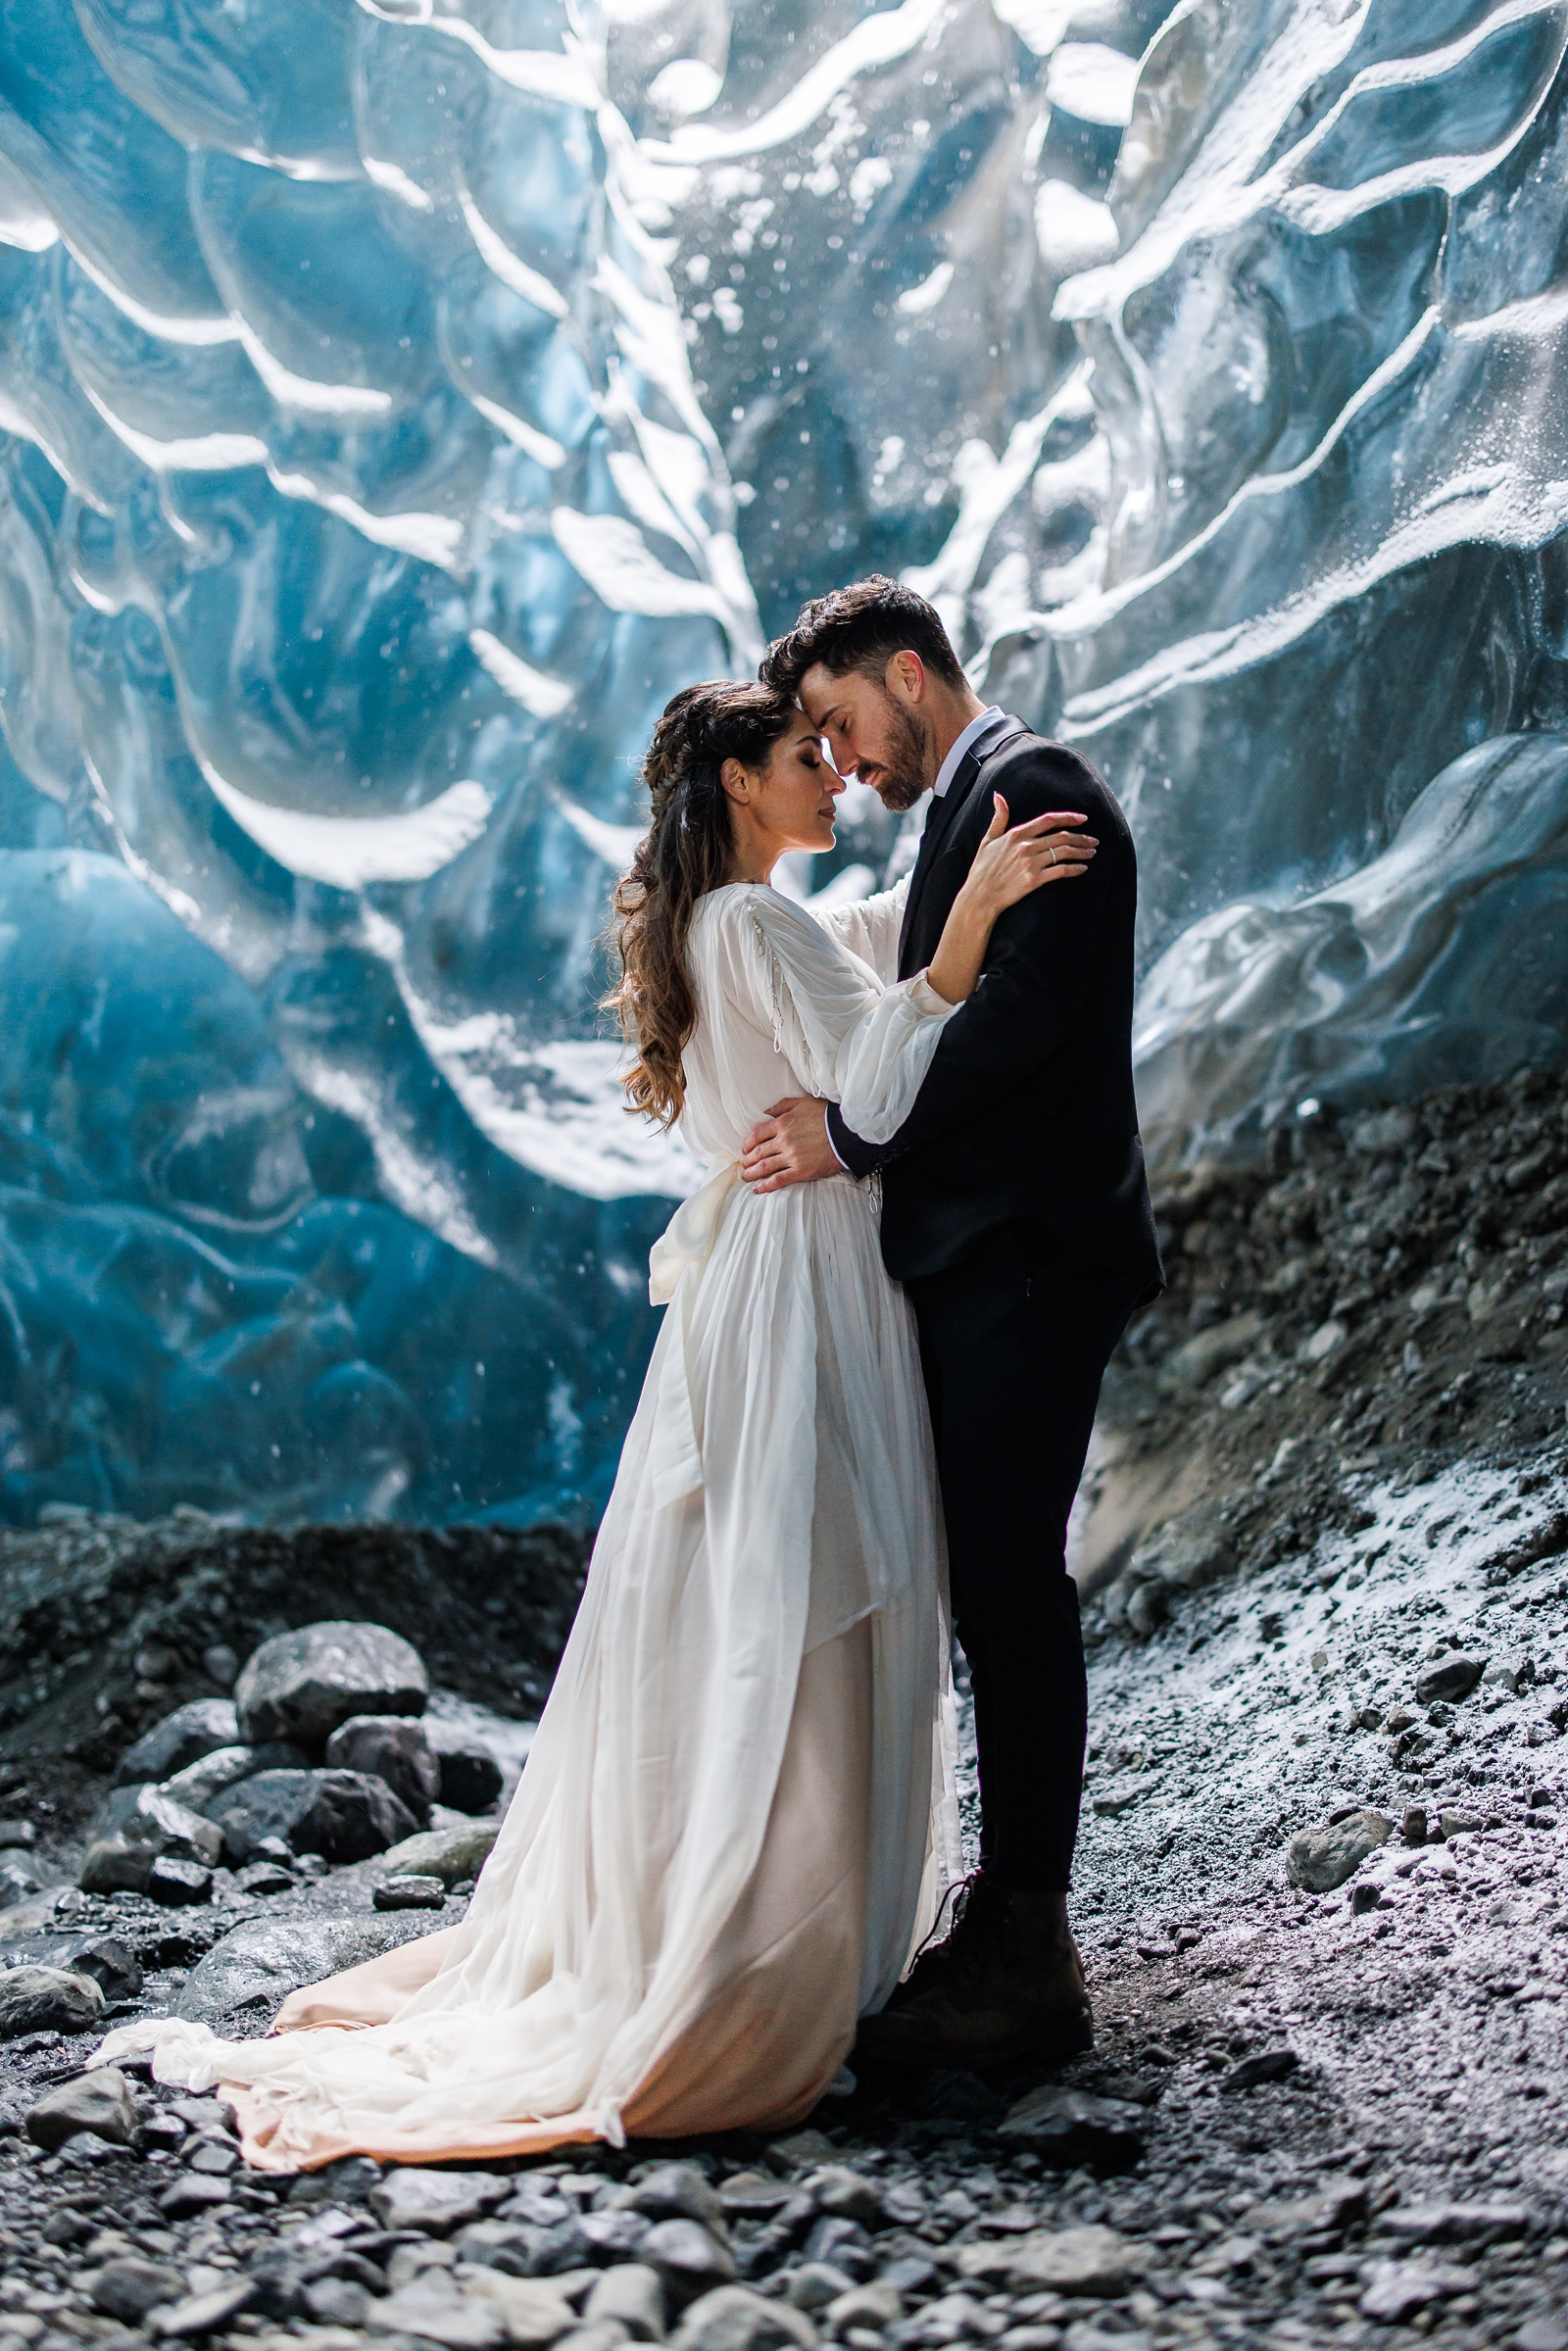 An eloping couple gently press their temples together while in a glacier cave in Iceland.